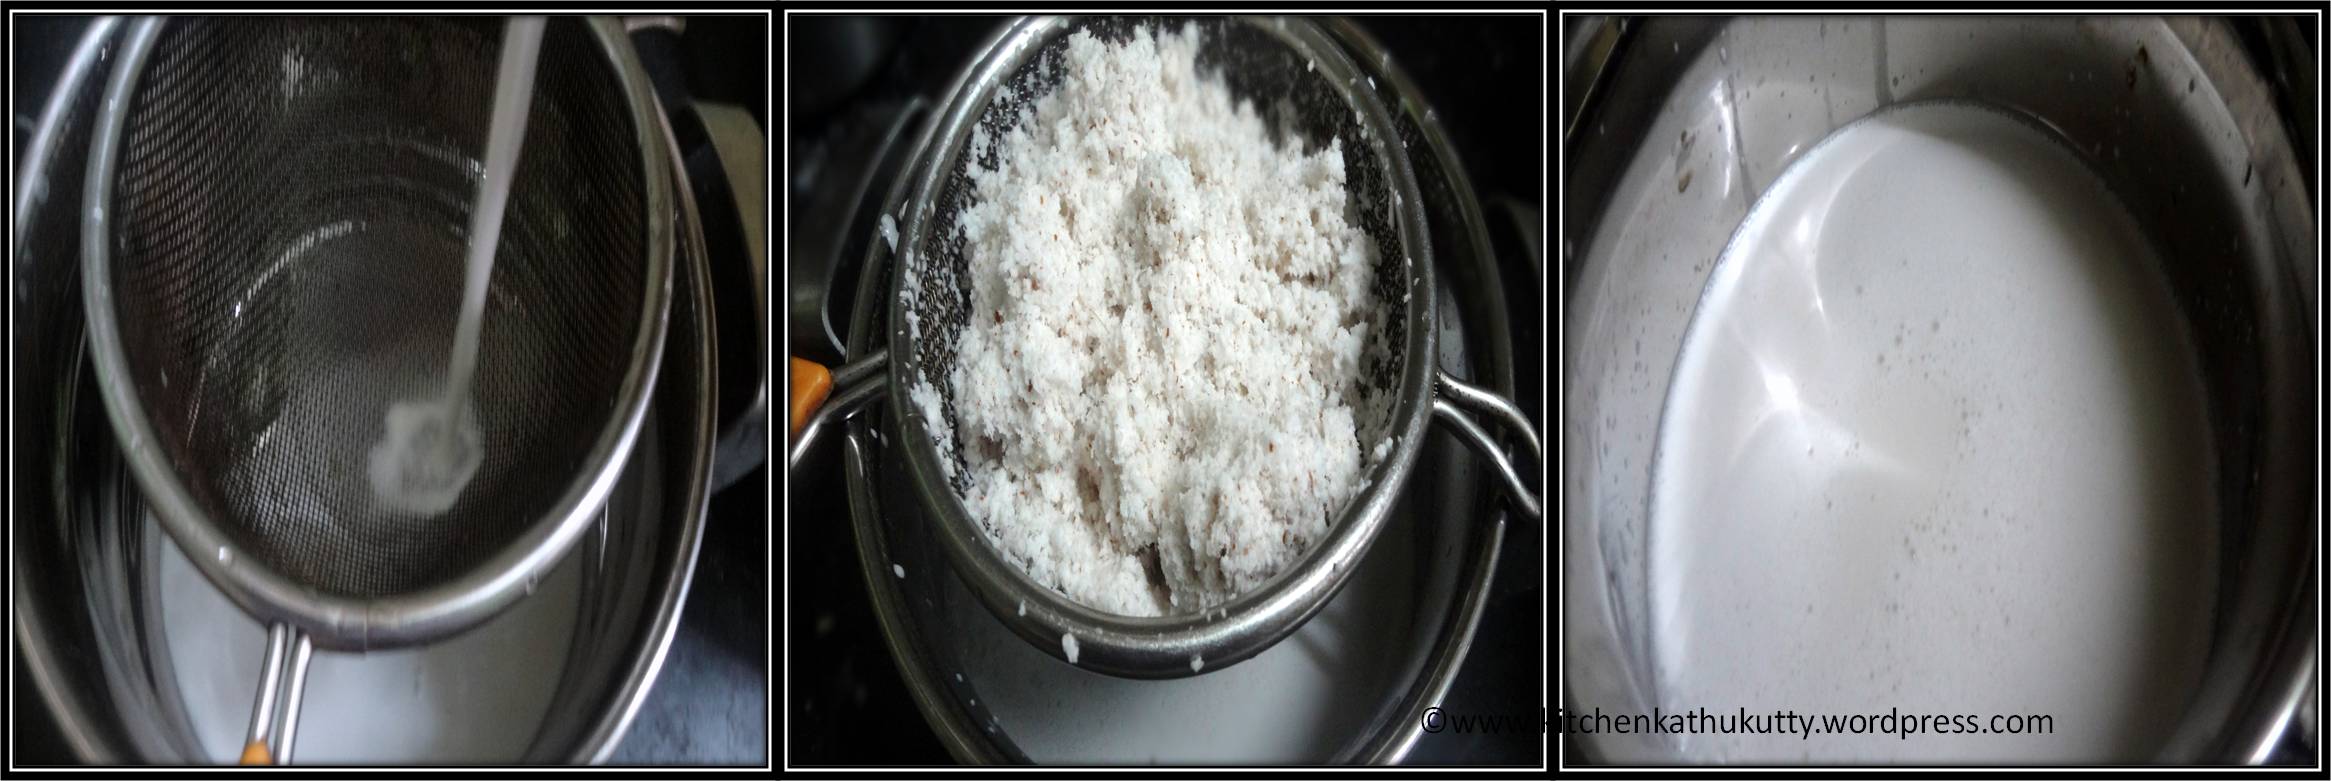 how to make coconut milk at home2.jpg